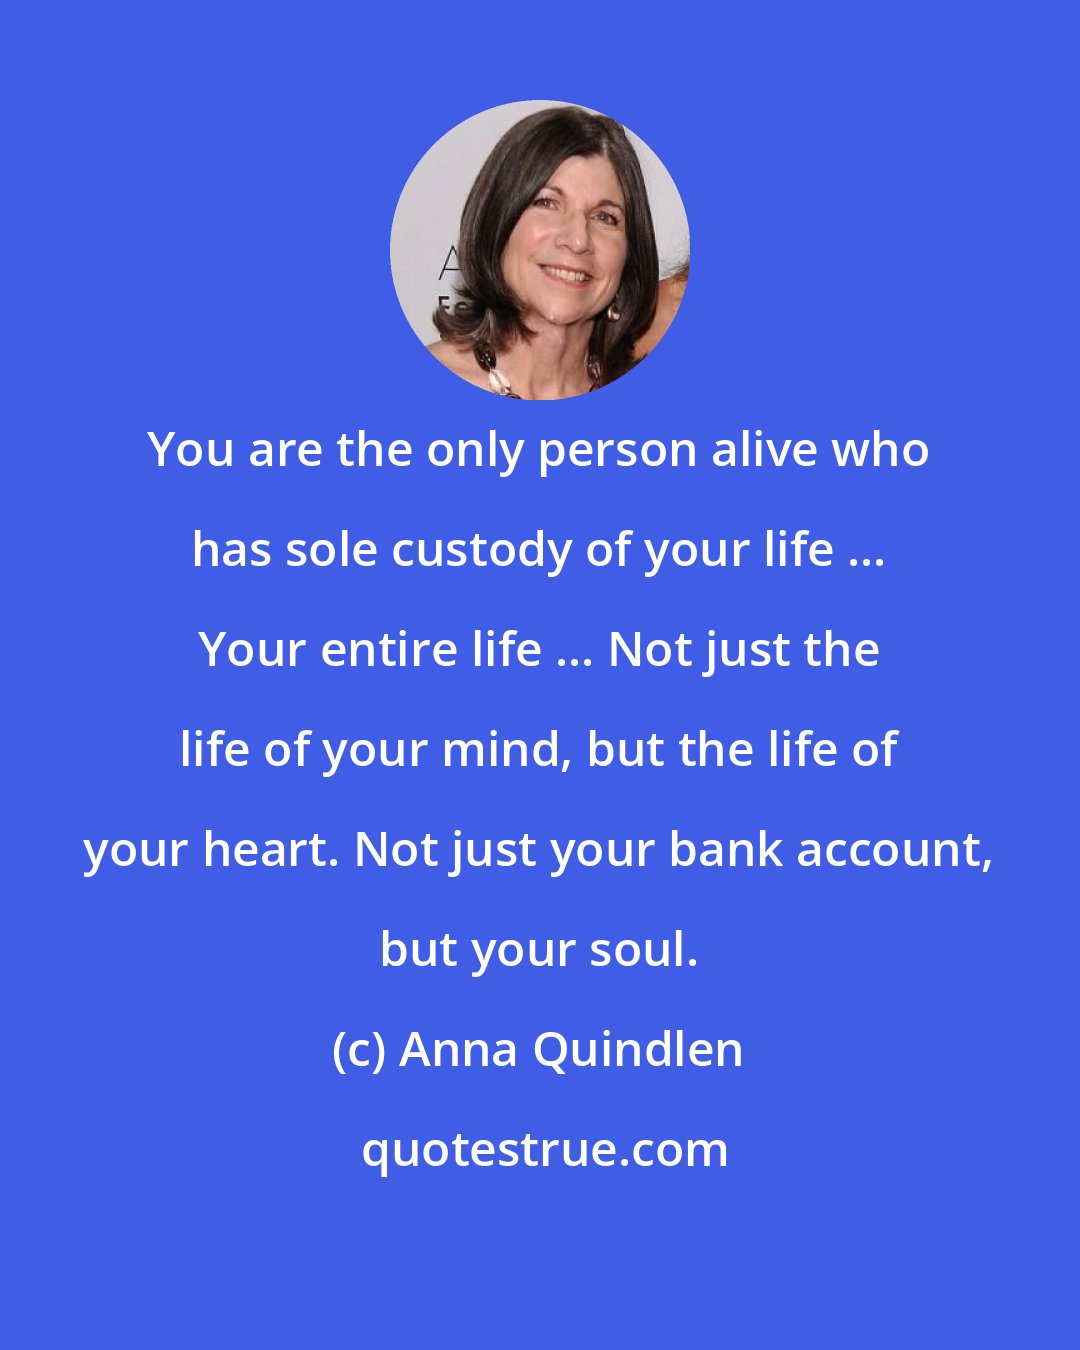 Anna Quindlen: You are the only person alive who has sole custody of your life ... Your entire life ... Not just the life of your mind, but the life of your heart. Not just your bank account, but your soul.